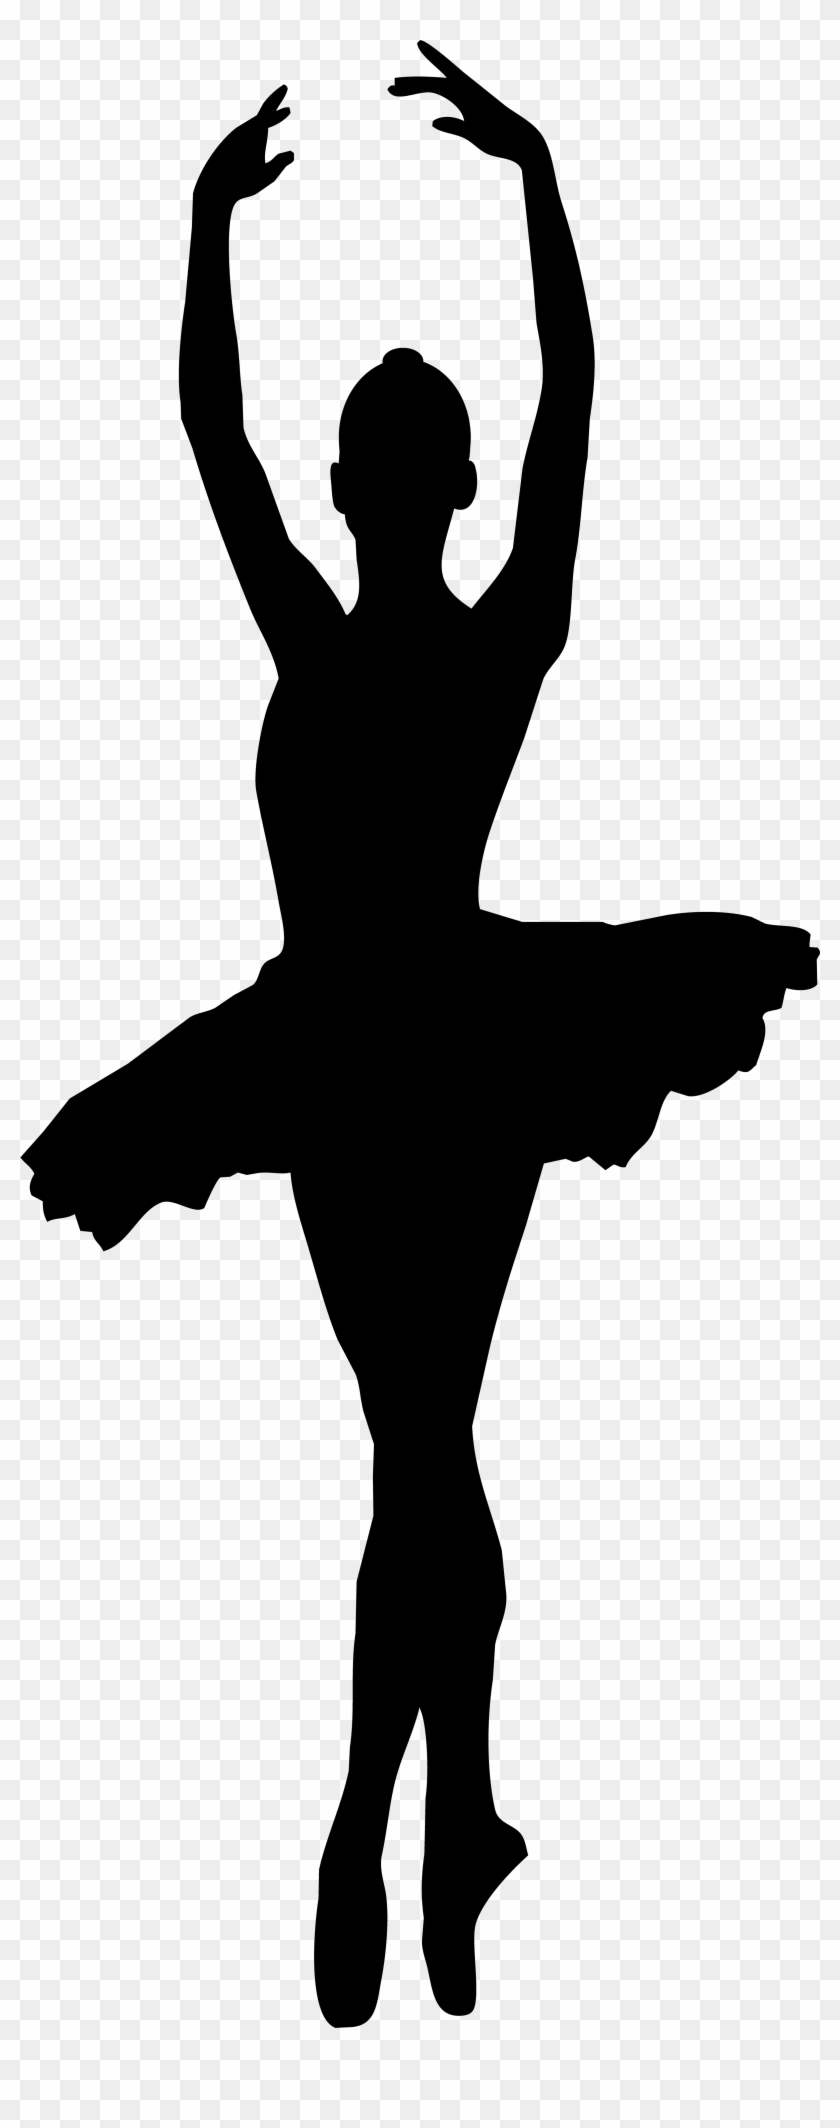 Ballerina Silhouette Png Clip Art Image - Ballerina Silhouette Free Png #198631